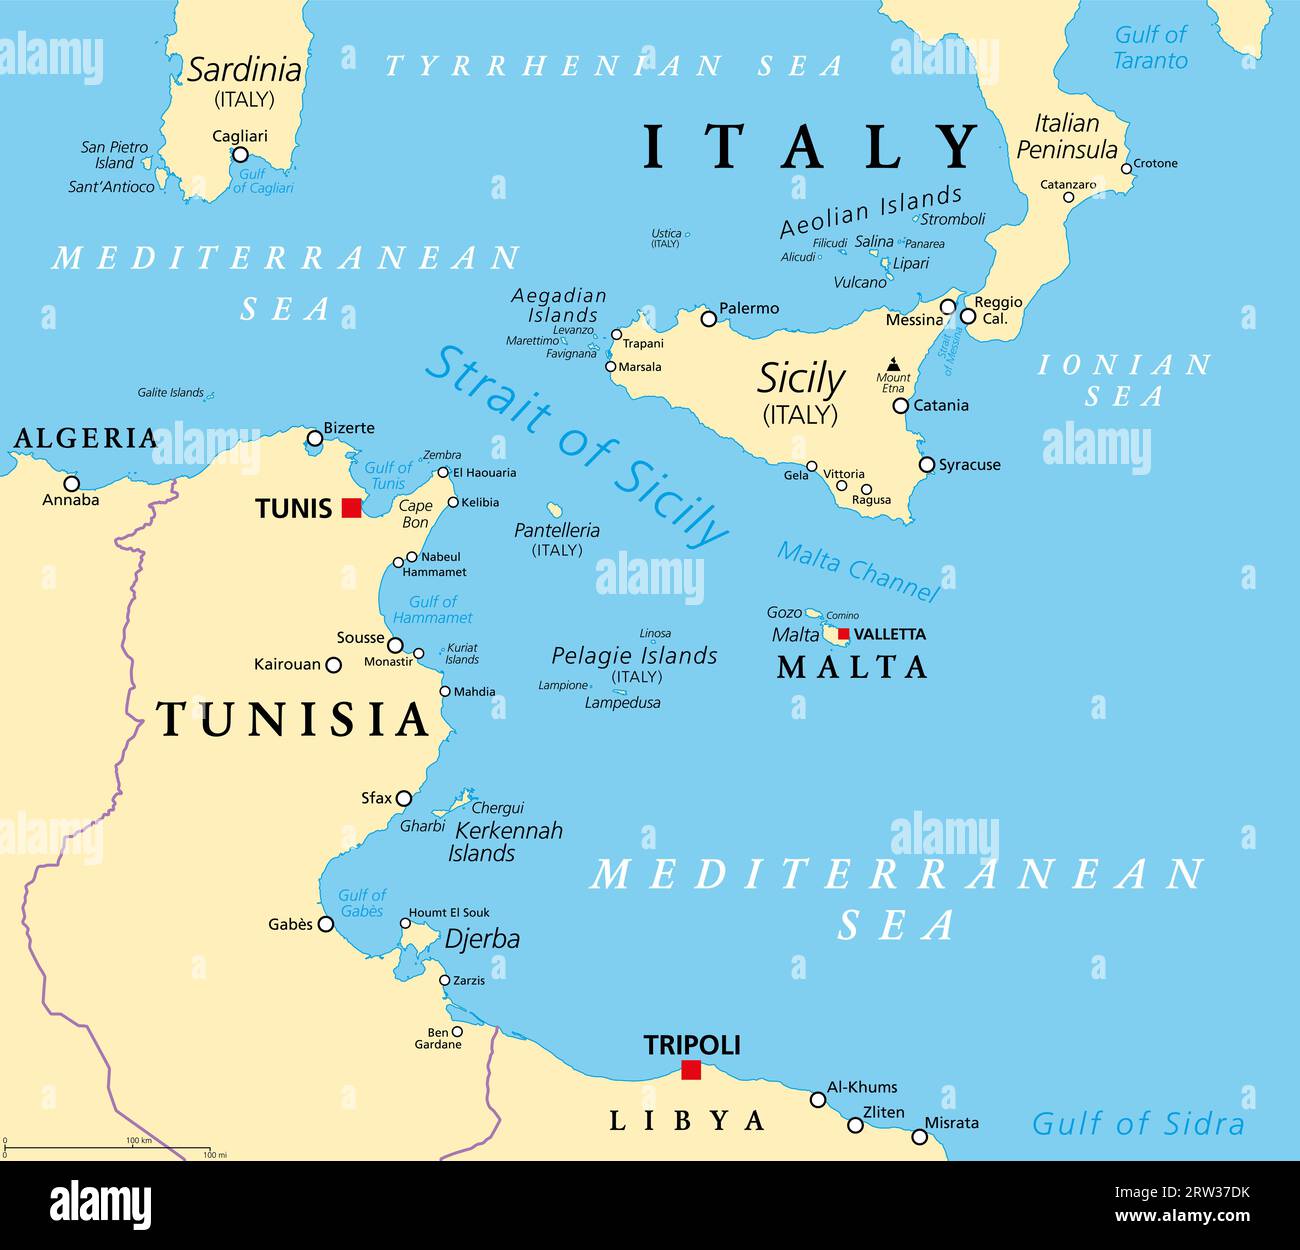 Strait of Sicily, political map. Also known as Sicilian Channel. A strait, located in the Mediterranean Sea, between Tunisia and Sicily, Italy. Stock Photo